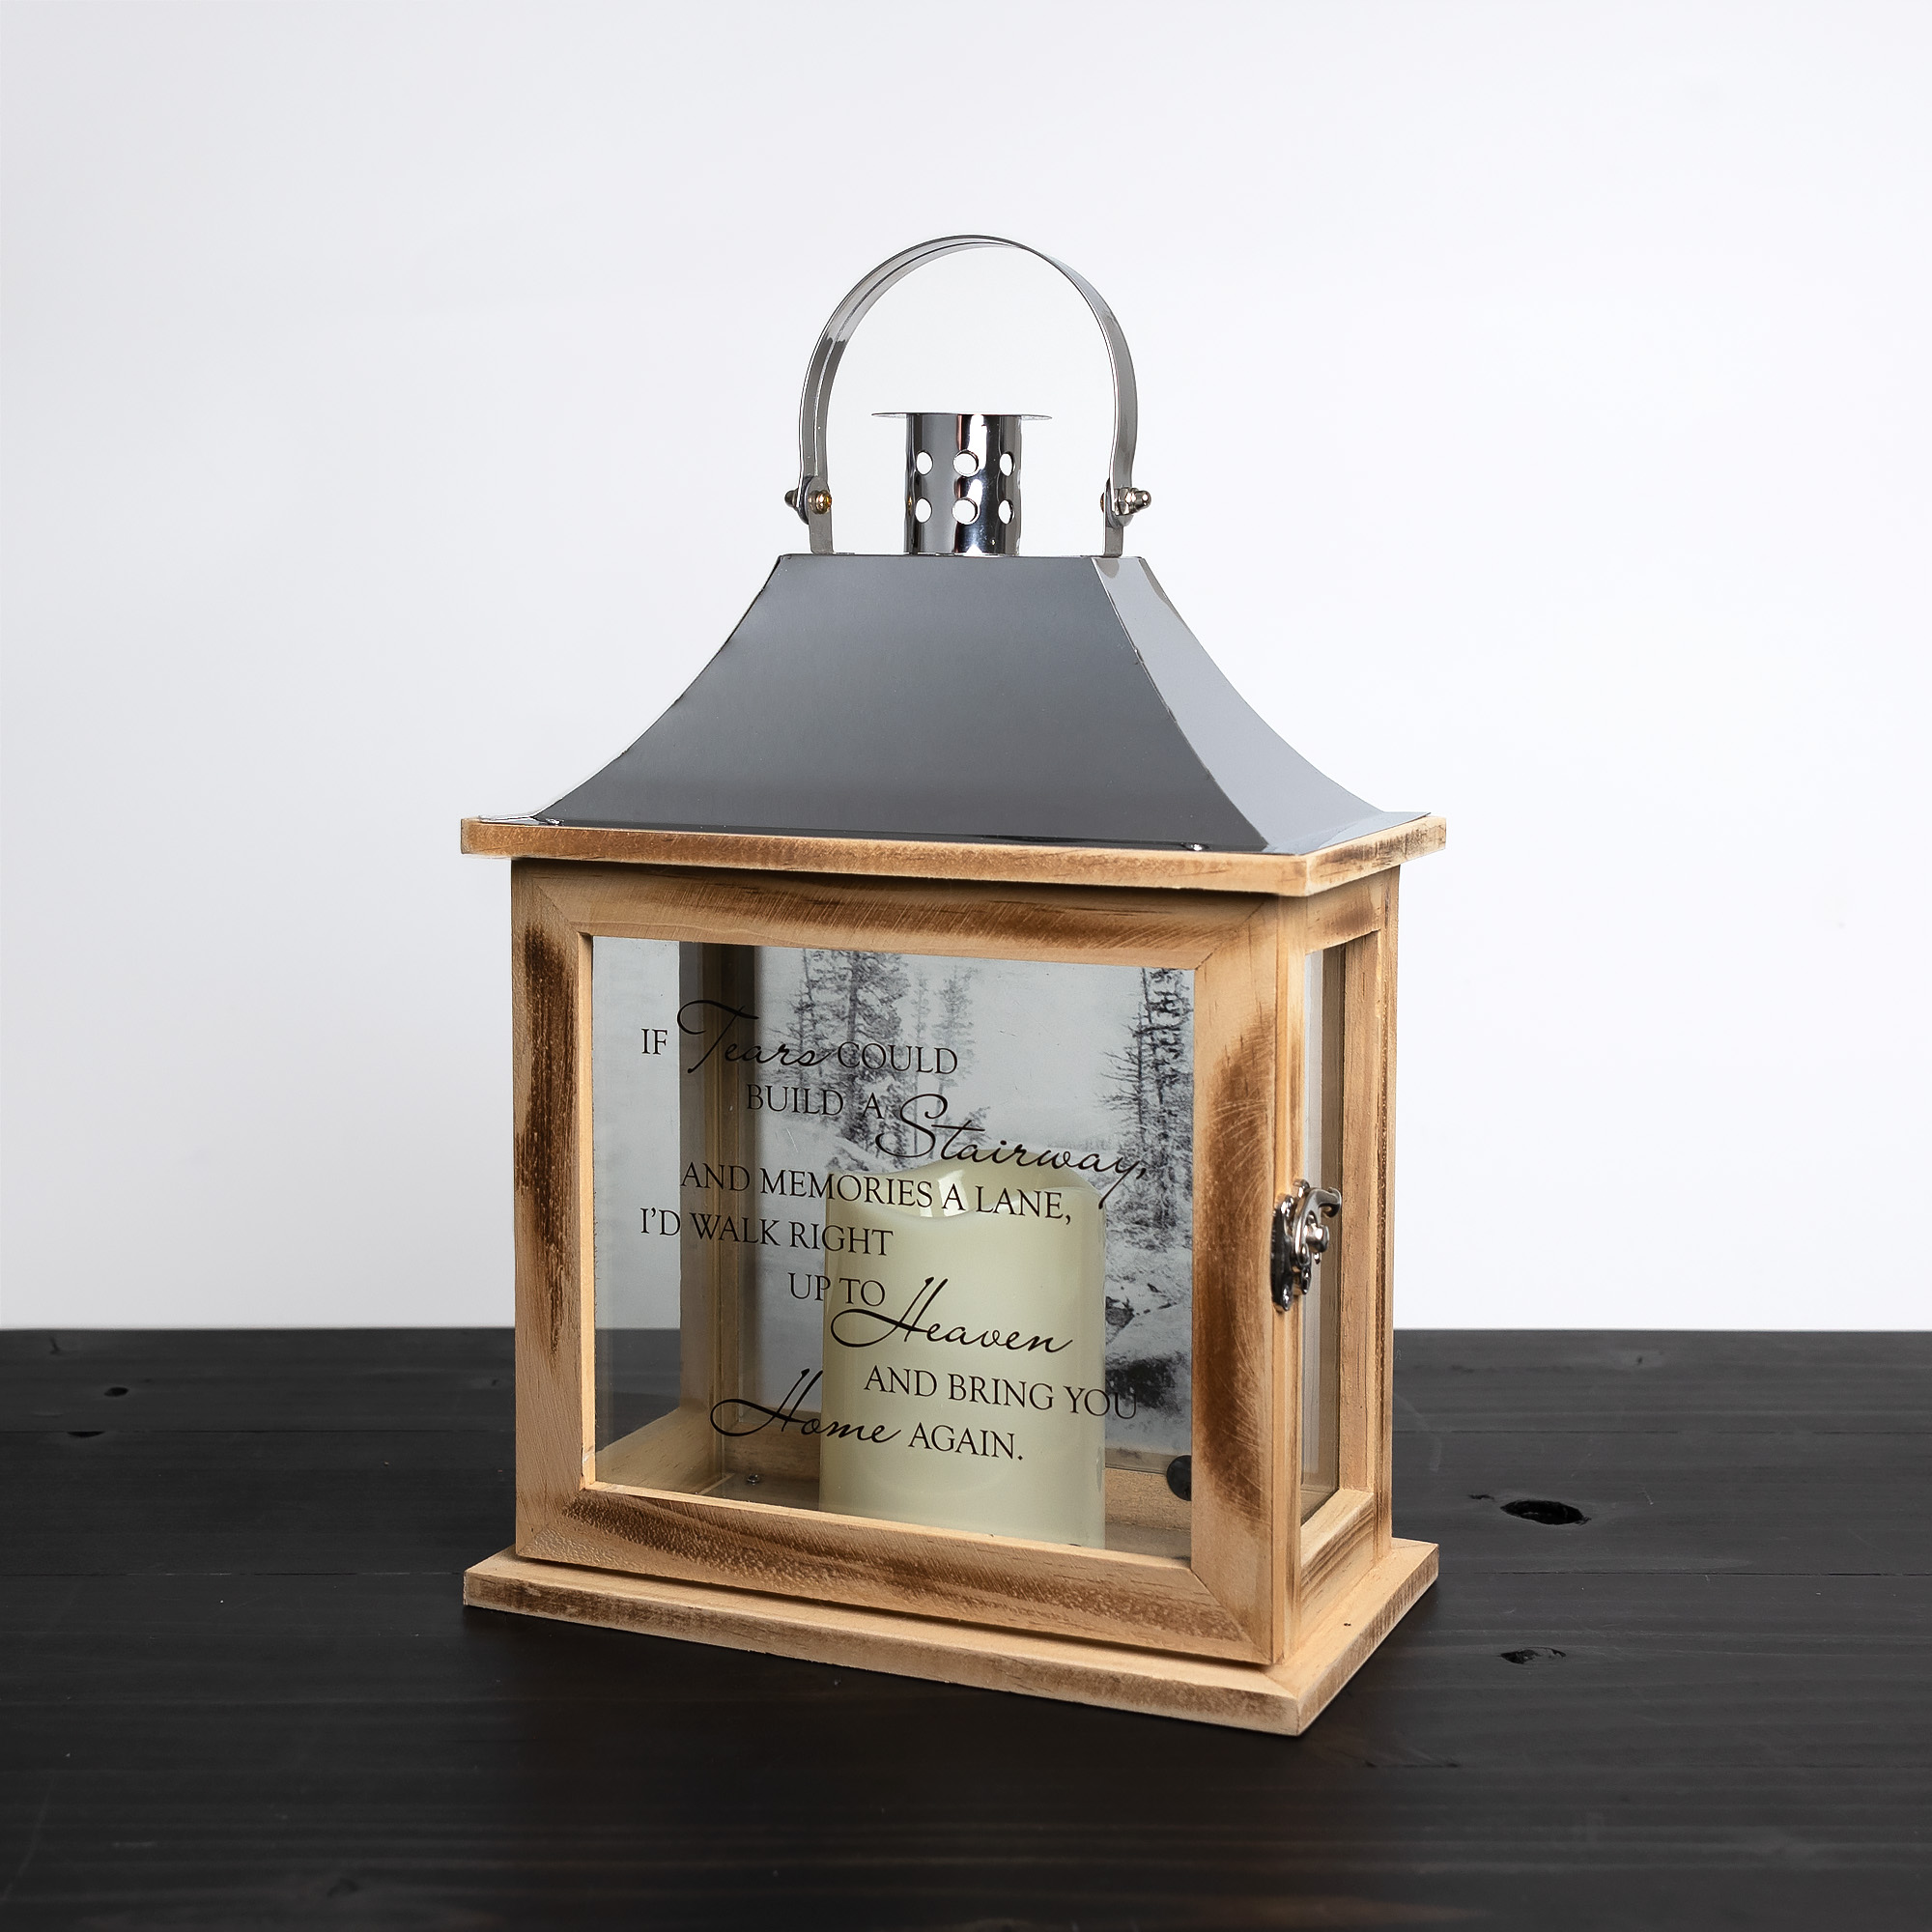 50 Best Memorial Gifts in Memory of a Loved One » Urns | Online